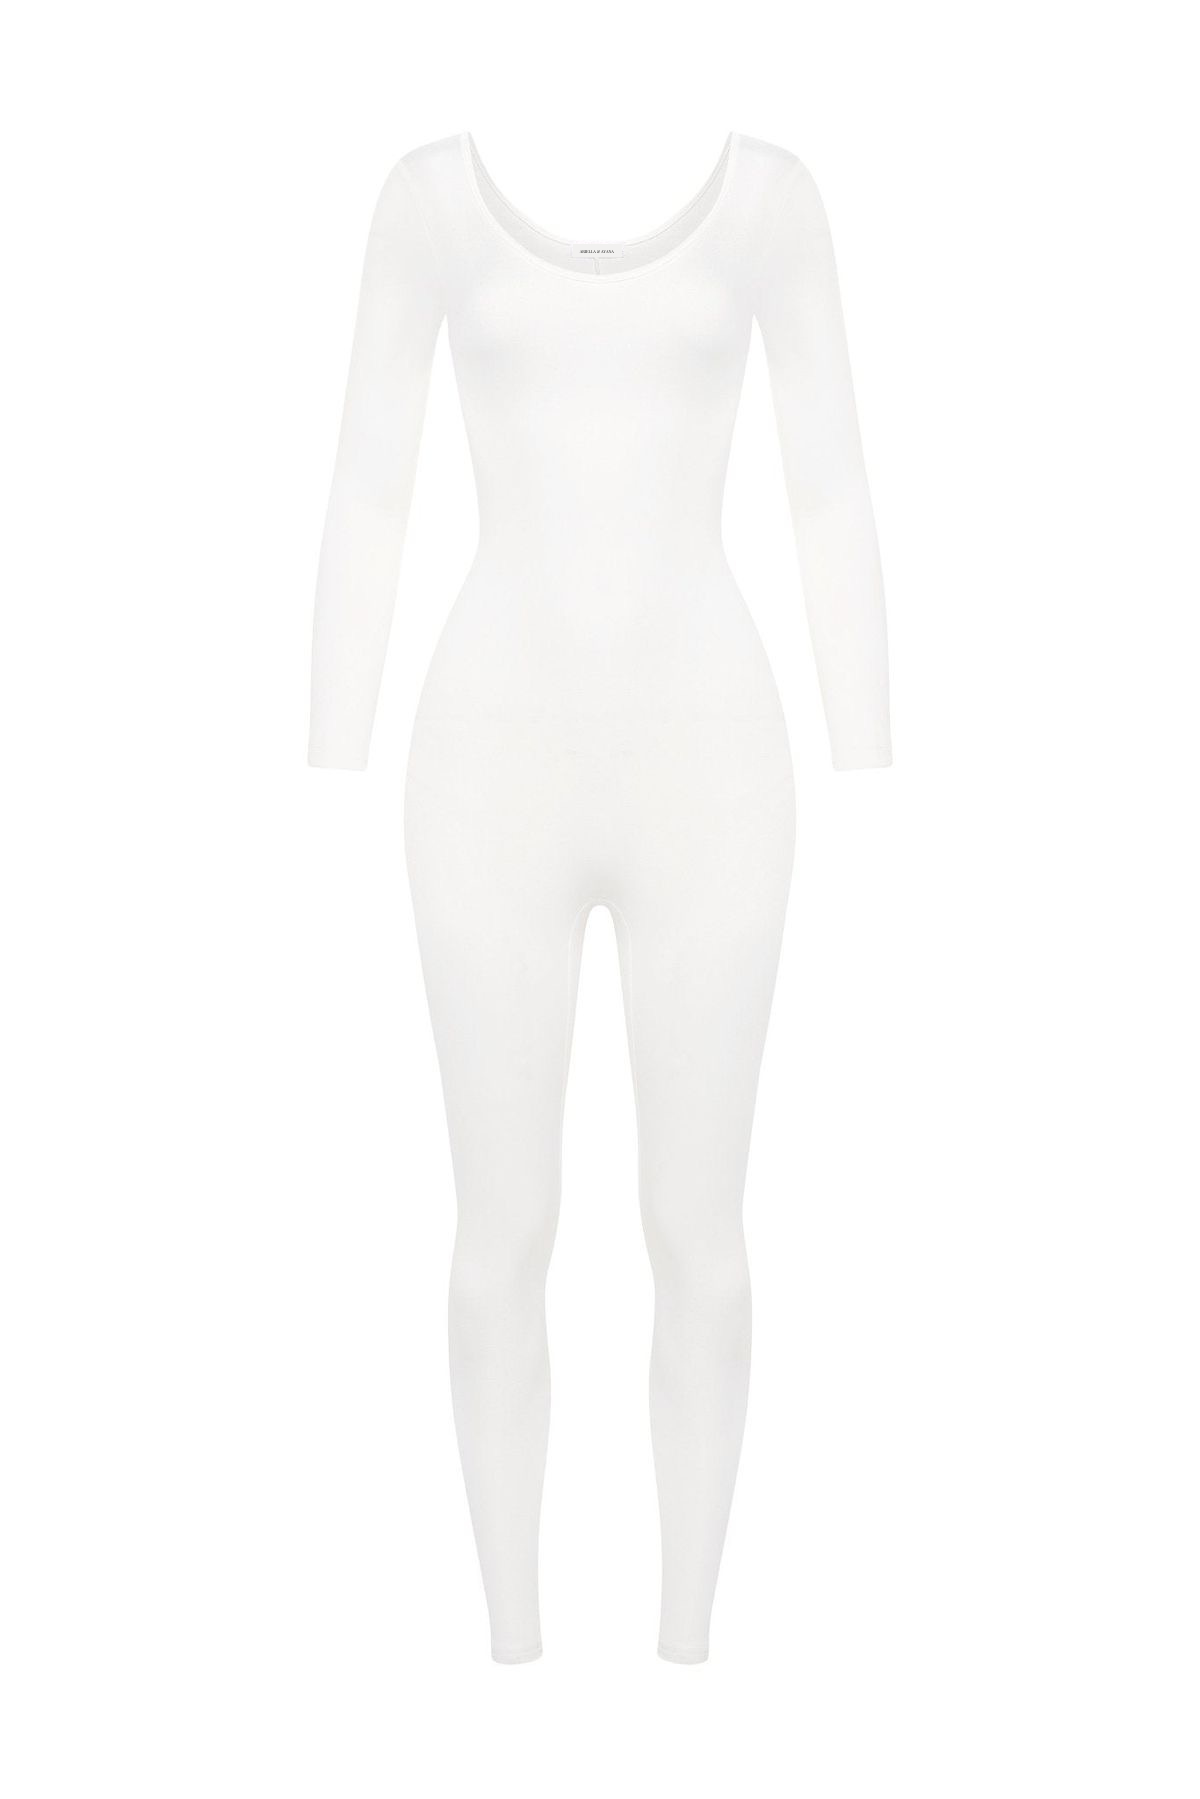 A&A Body All Jumpsuit